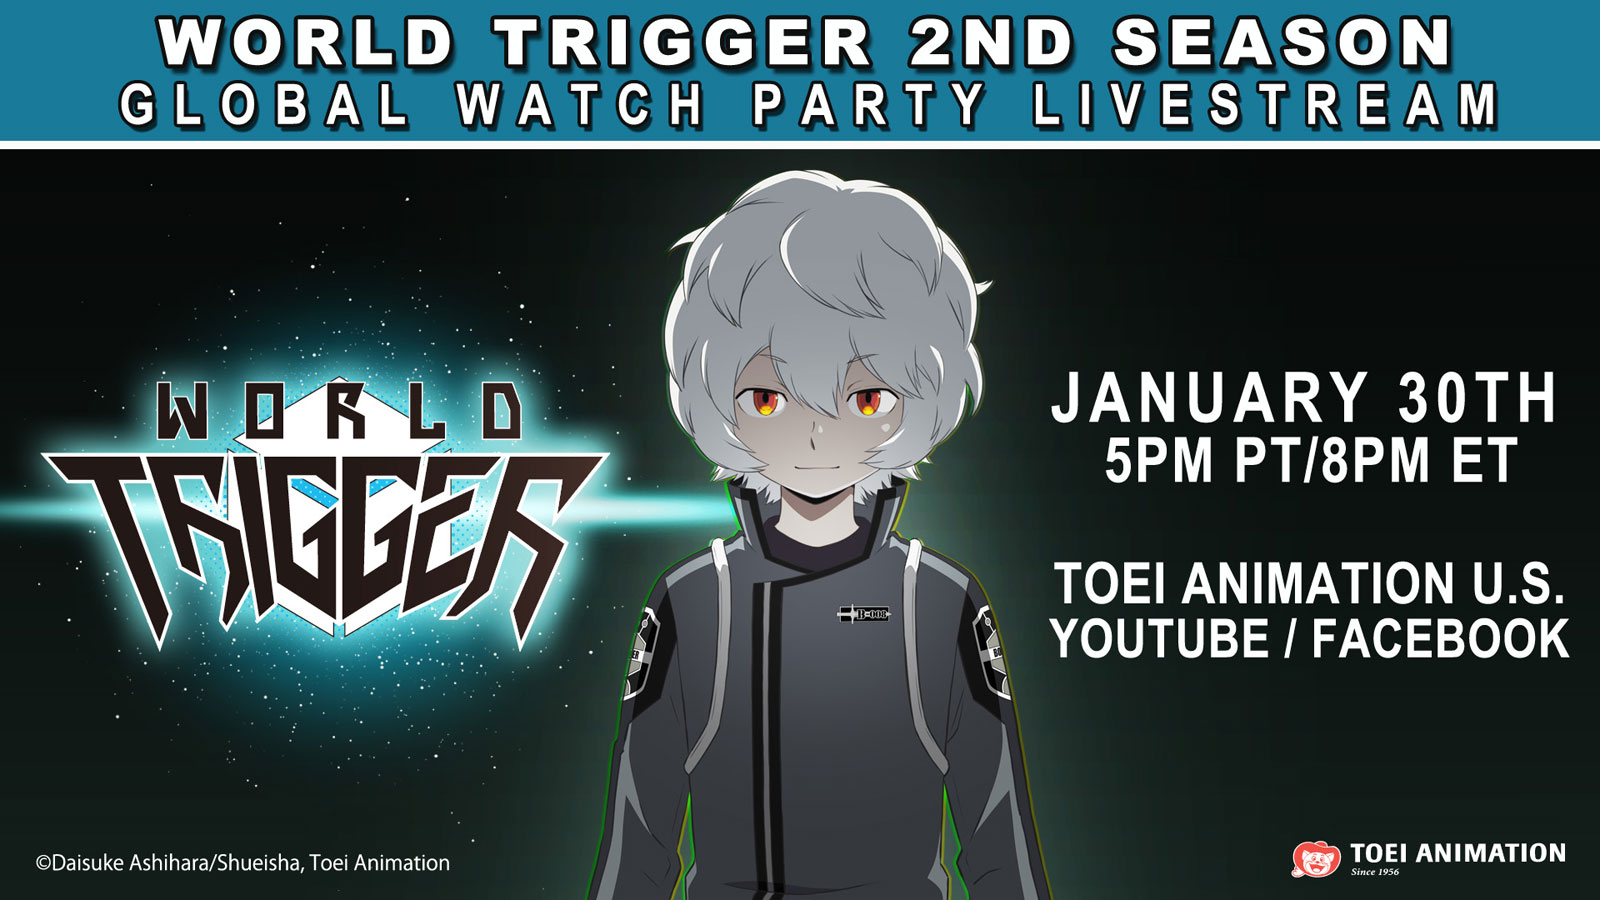 TOEI ANIMATION ANNOUNCES GLOBAL WATCH PARTY EVENT IN CELEBRATION OF WORLD TRIGGER SEASON 2 PREMIERE